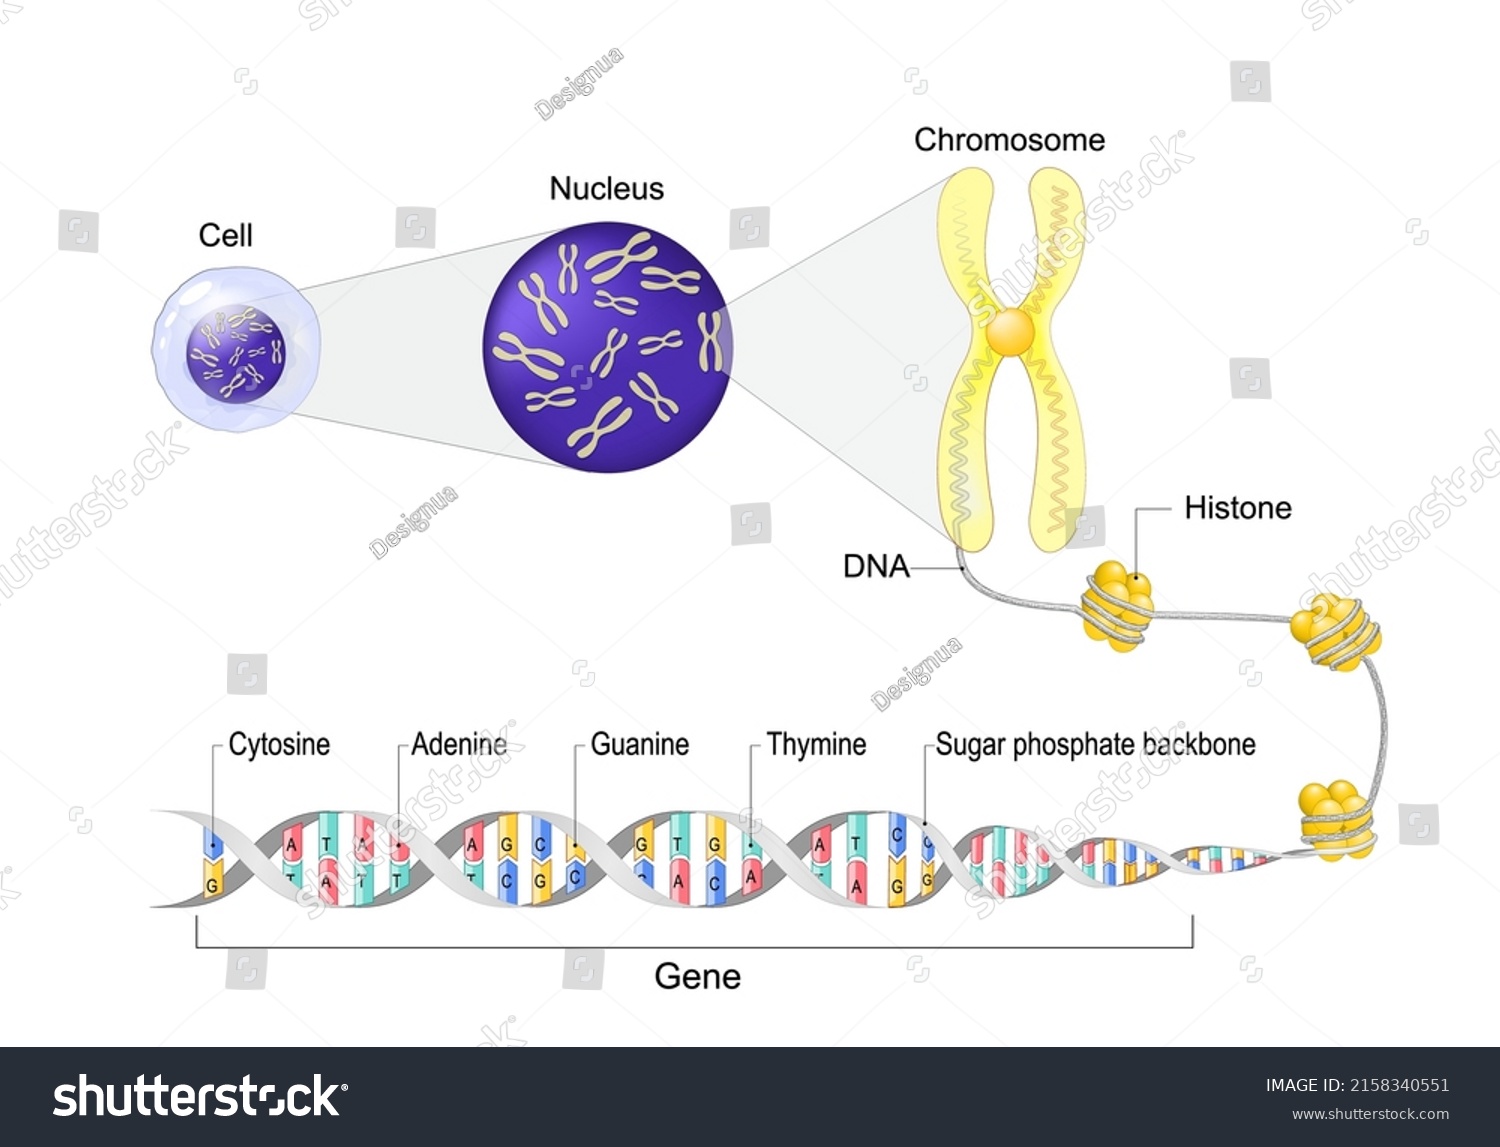 Cell Anatomy Nucleus Chromosomes Closeup Dna Stock Vector (Royalty Free ...